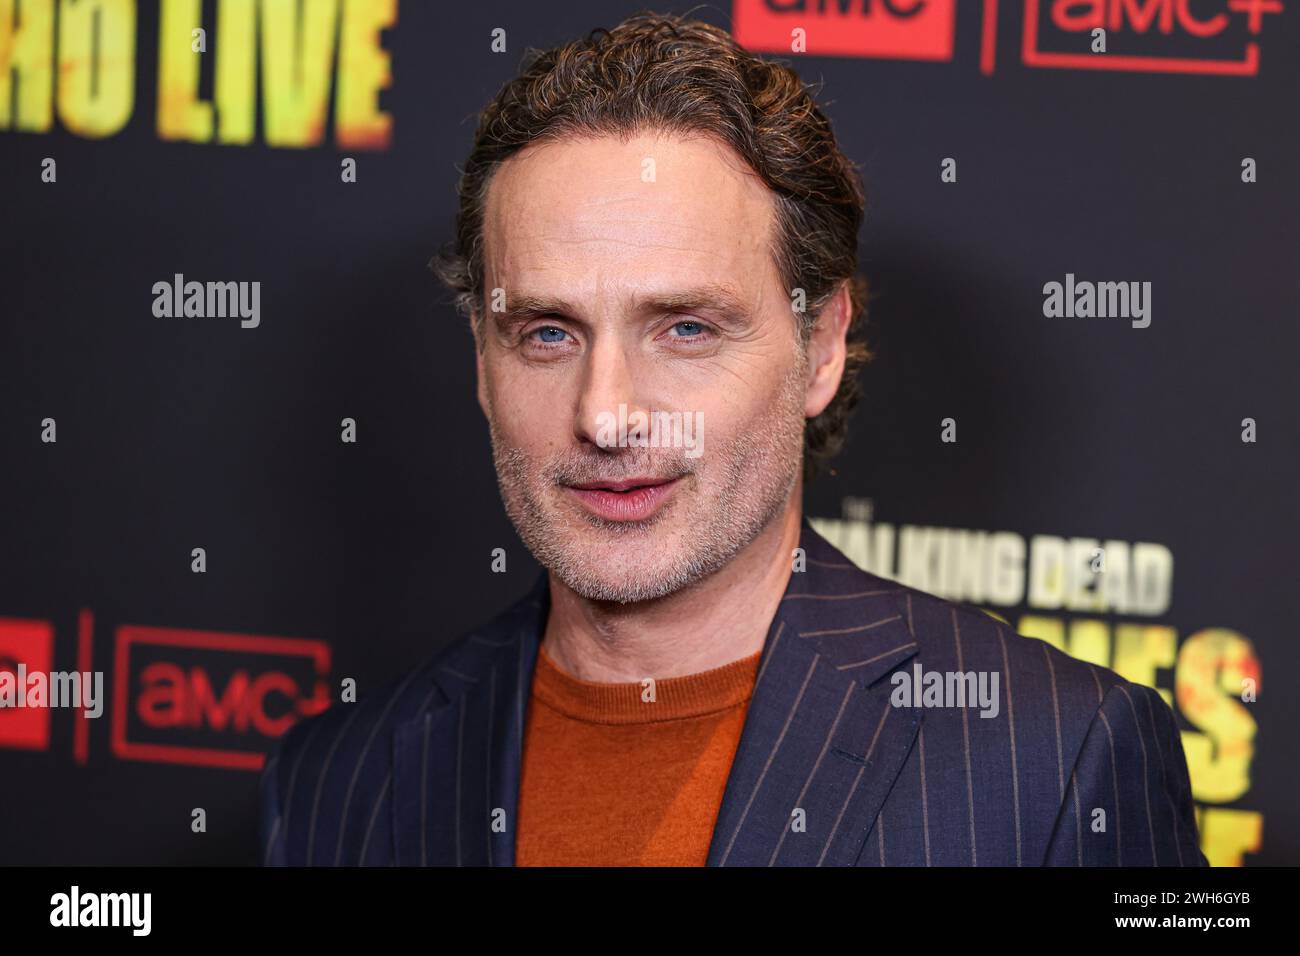 HOLLYWOOD, LOS ANGELES, KALIFORNIEN, USA - FEBRUAR 07: Andrew Lincoln kommt zur Los Angeles Premiere von AMC+'s The Walking Dead: the Ones Who Live' Staffel 1 fand am 7. Februar 2024 im Linwood Dunn Theater im Pickford Center for Motion Picture Study in Hollywood, Los Angeles, Kalifornien, USA statt. (Foto: Xavier Collin/Image Press Agency) Stockfoto